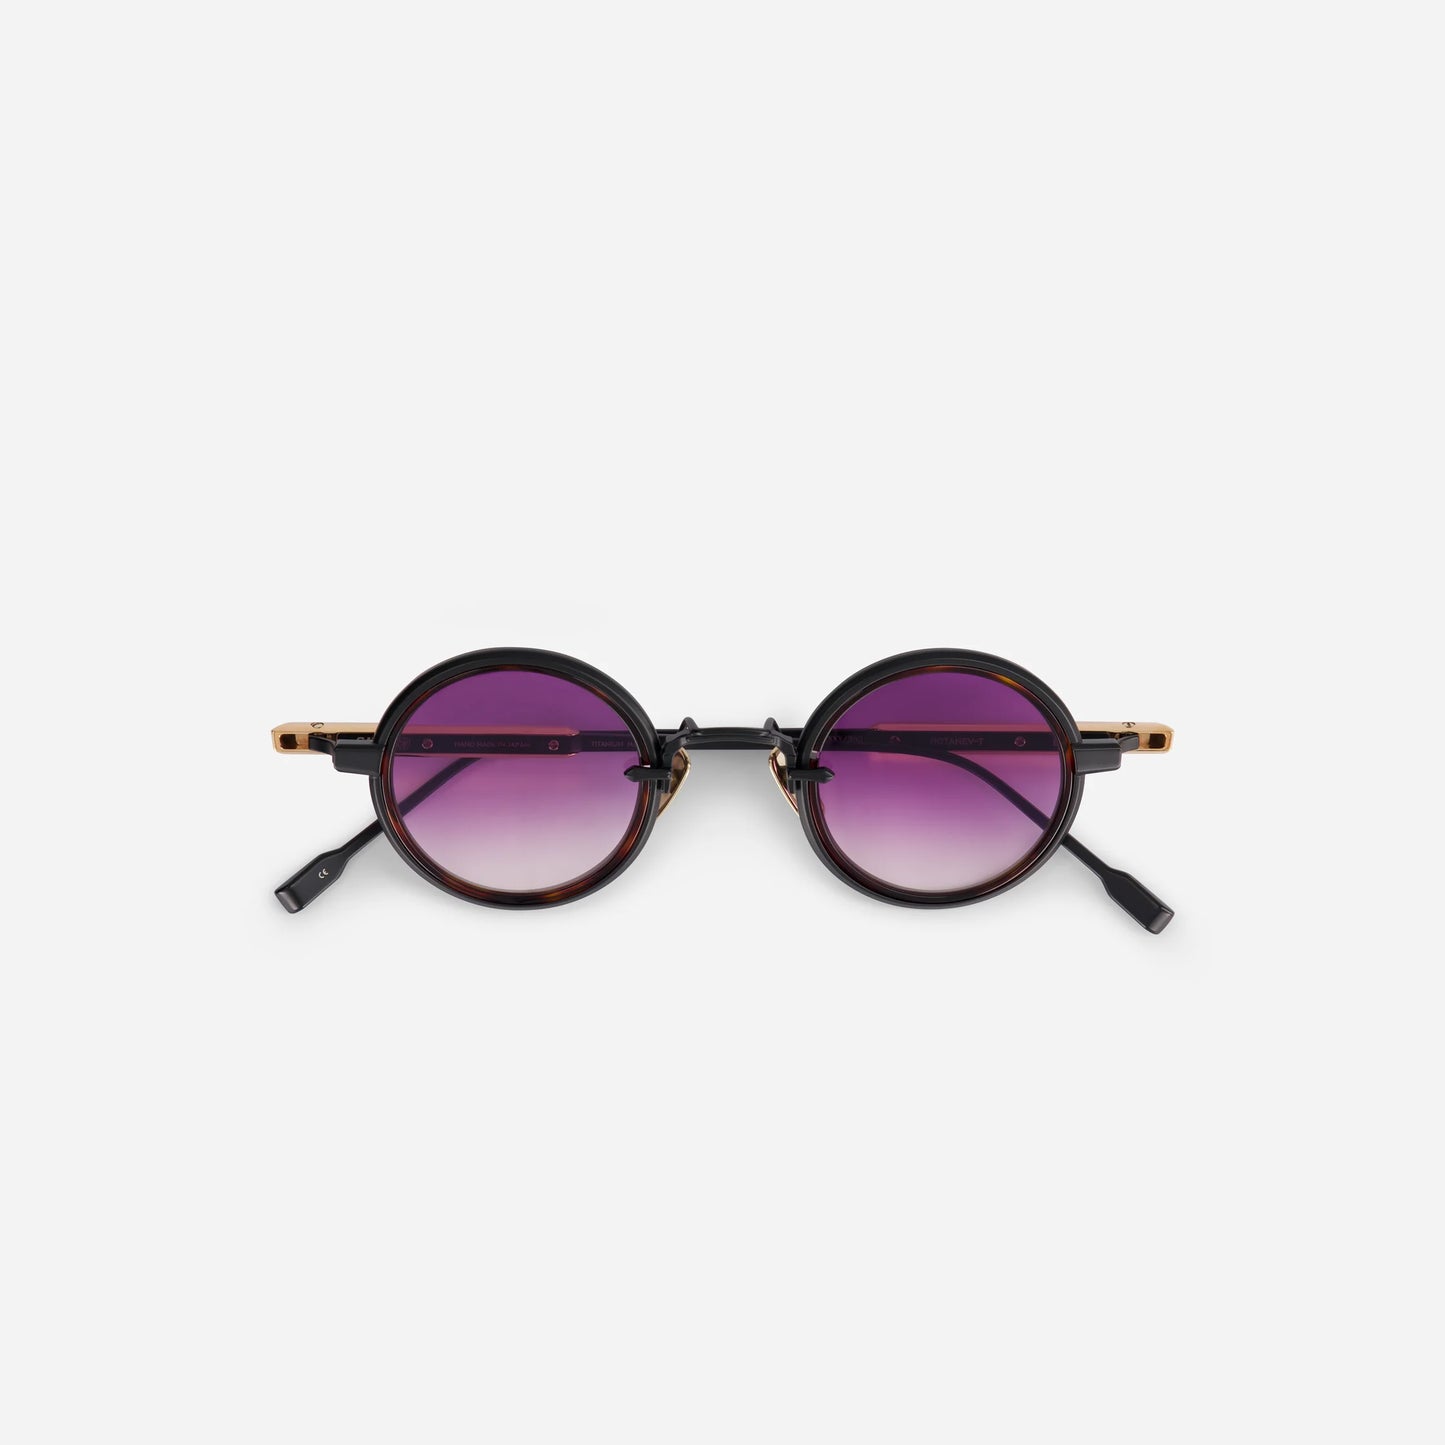 The Rotanev-T B/RG features a titanium frame with black mat and rose gold coating, tortoise takiron rim insert, and gradient purple lenses.